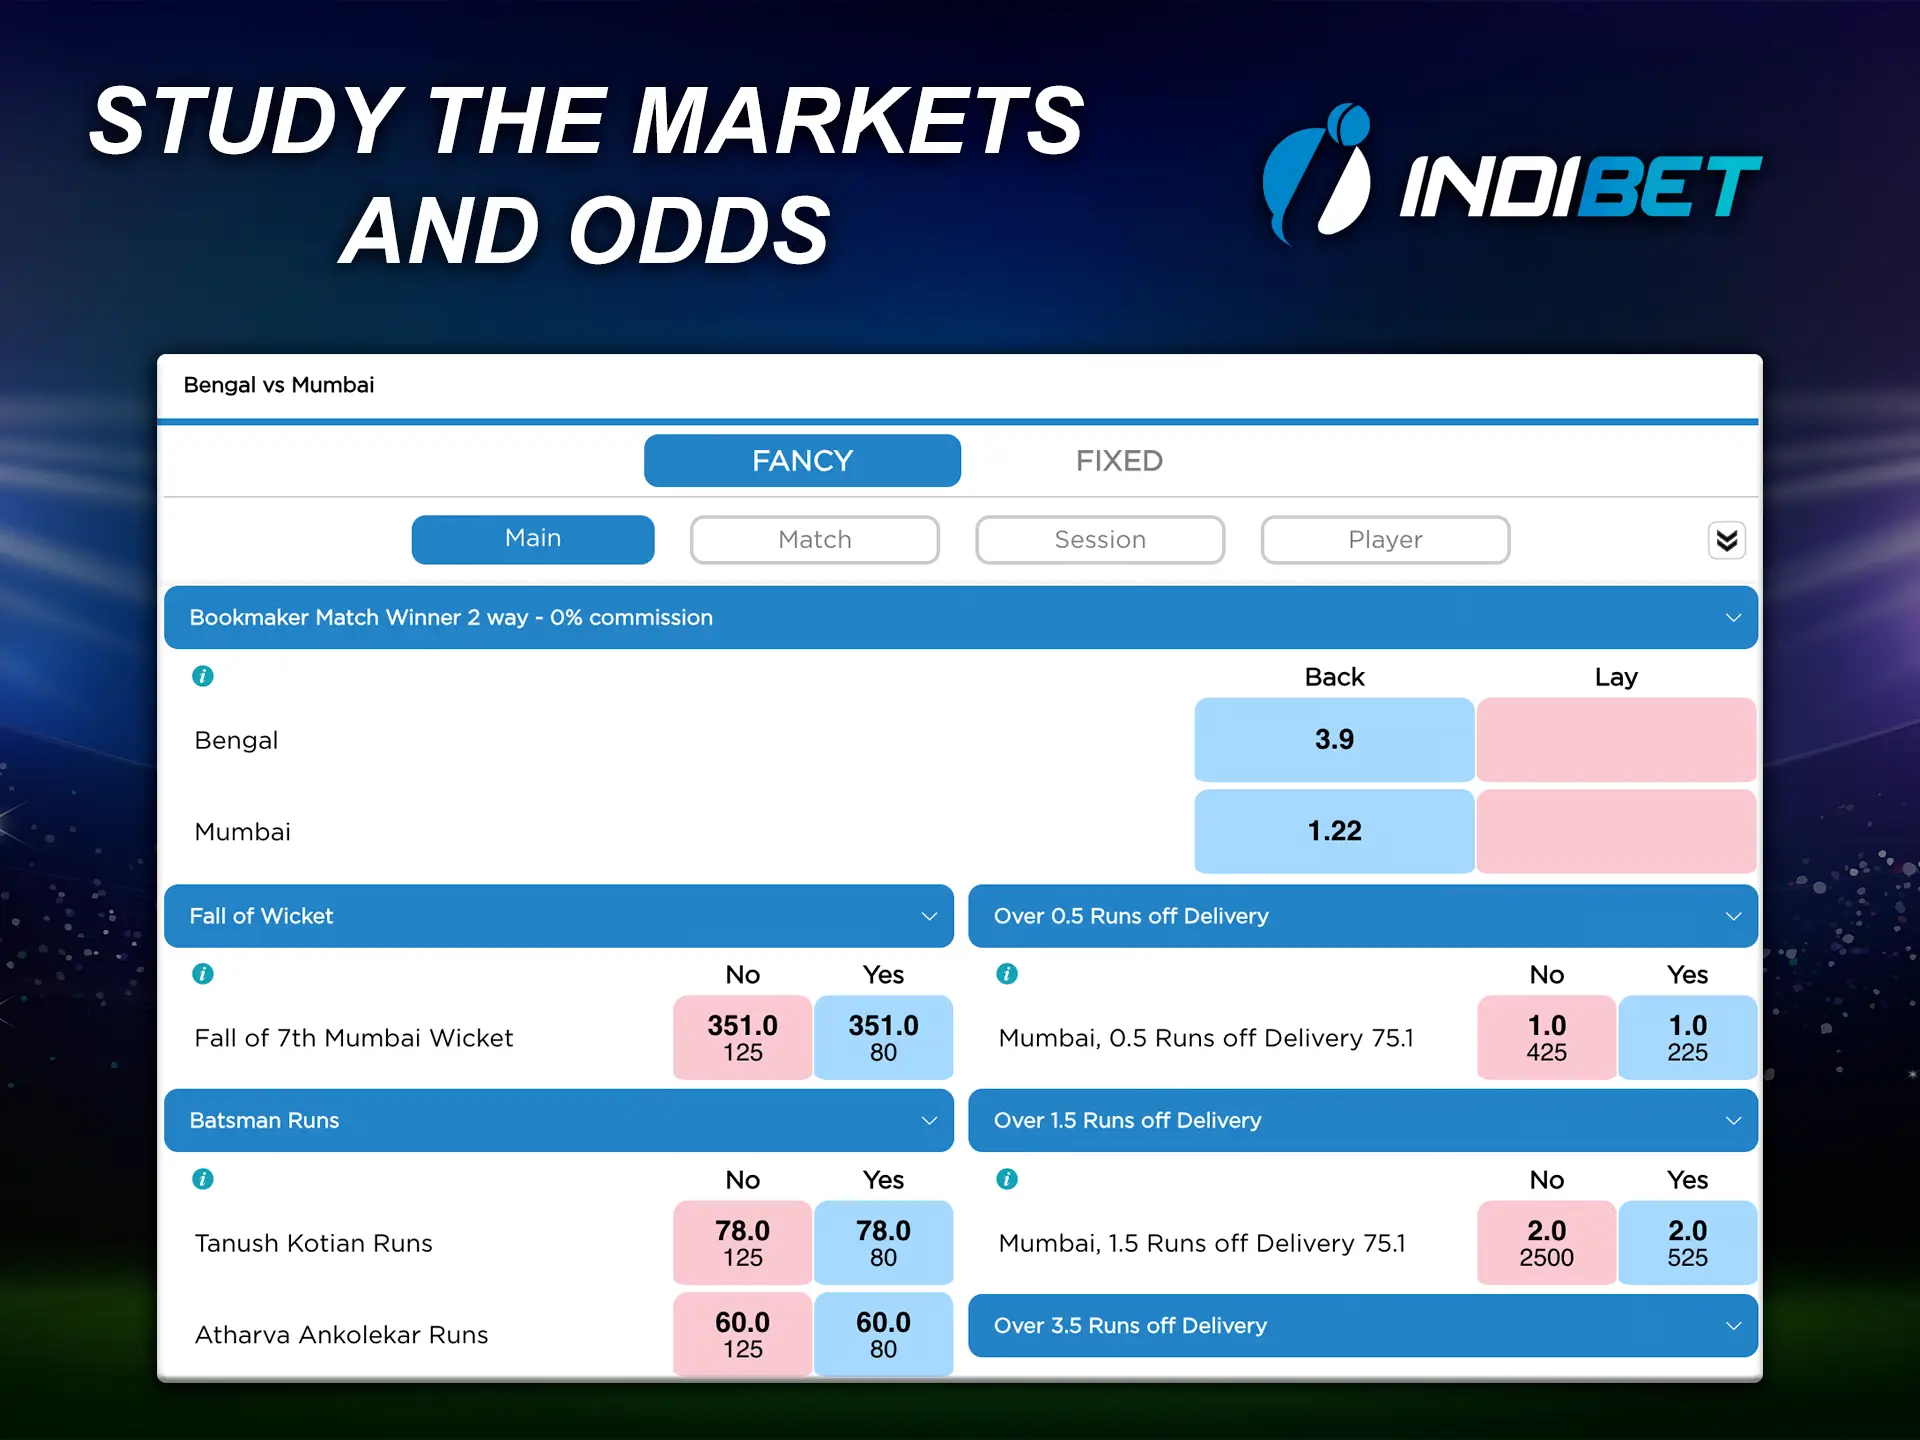 Be sure to pay attention to the odds presented on the Indibet website.